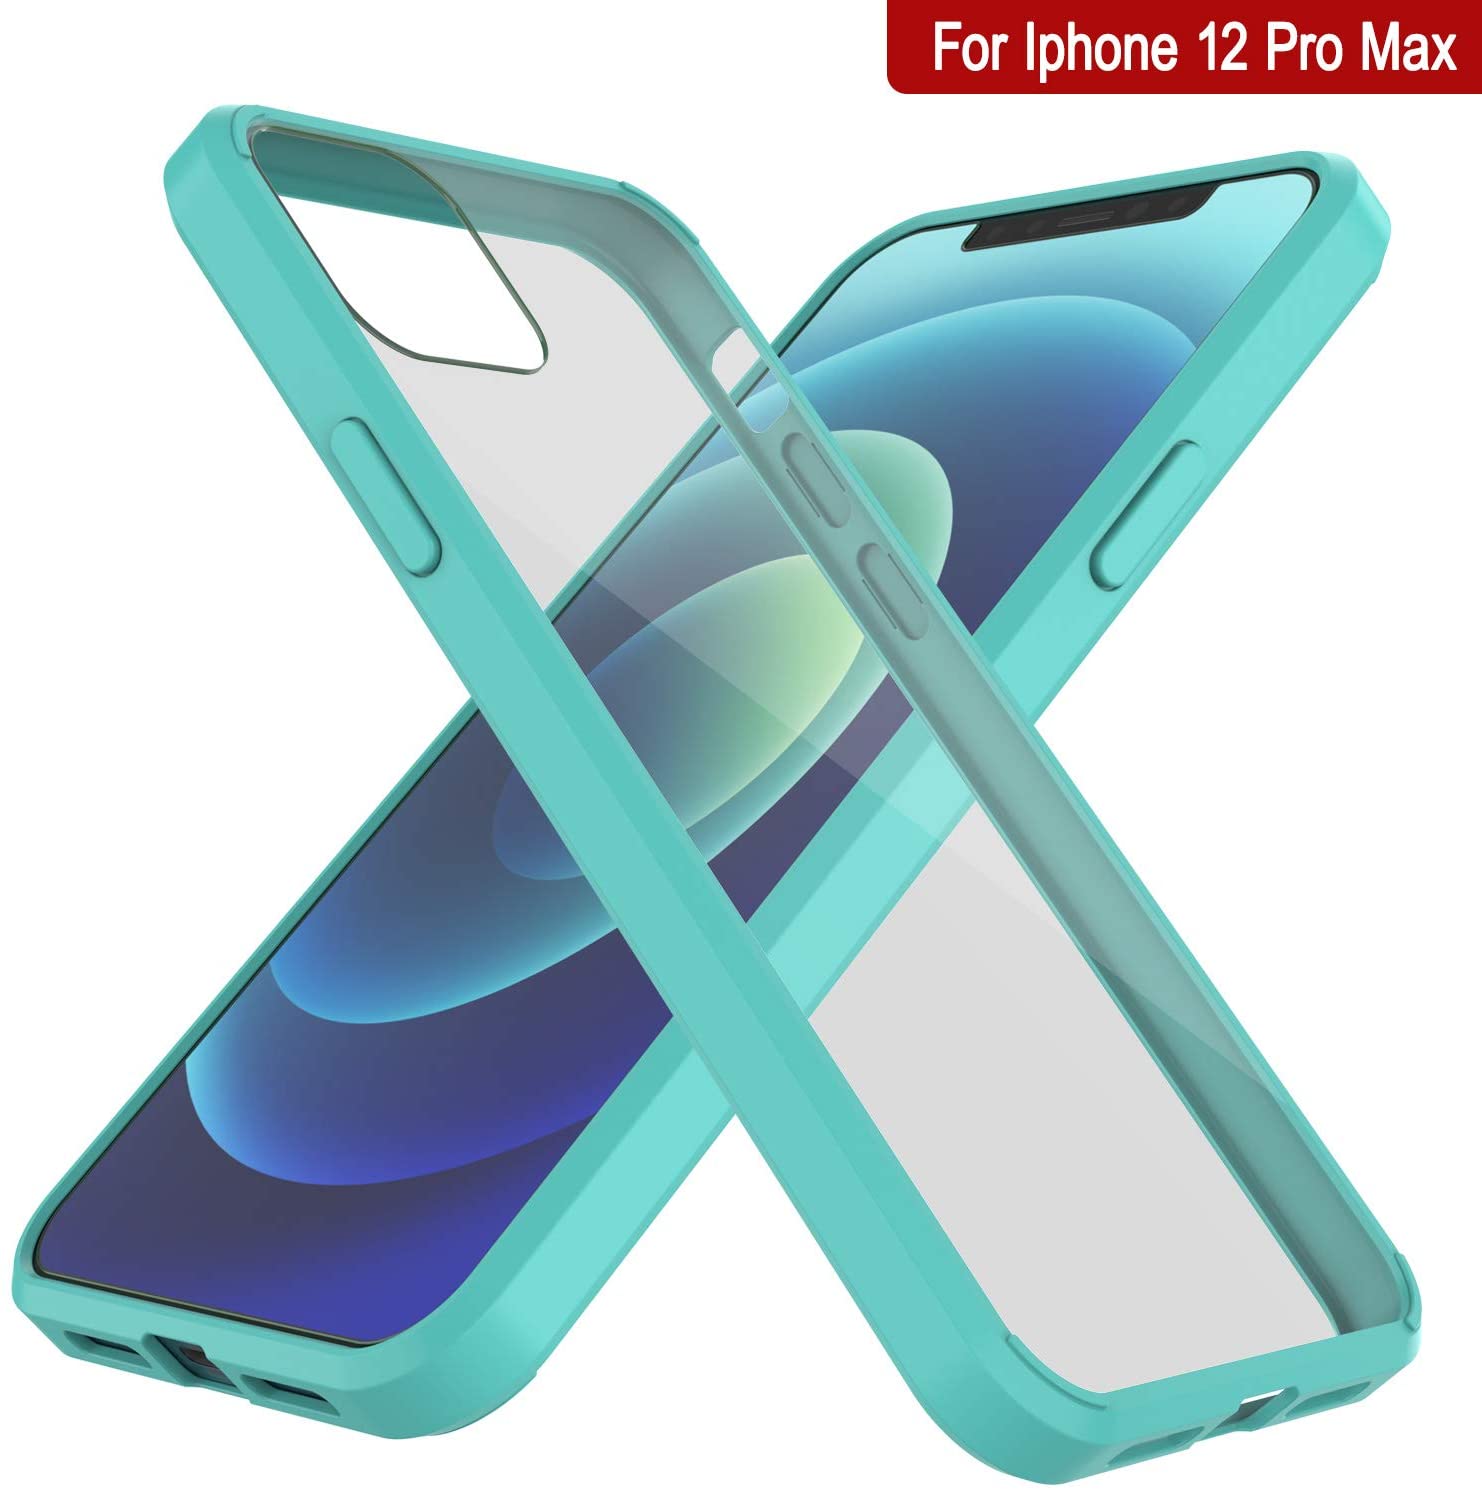 iPhone 13 Pro Max Case Punkcase® LUCID 2.0 Teal Series w/ PUNK SHIELD Screen Protector | Ultra Fit